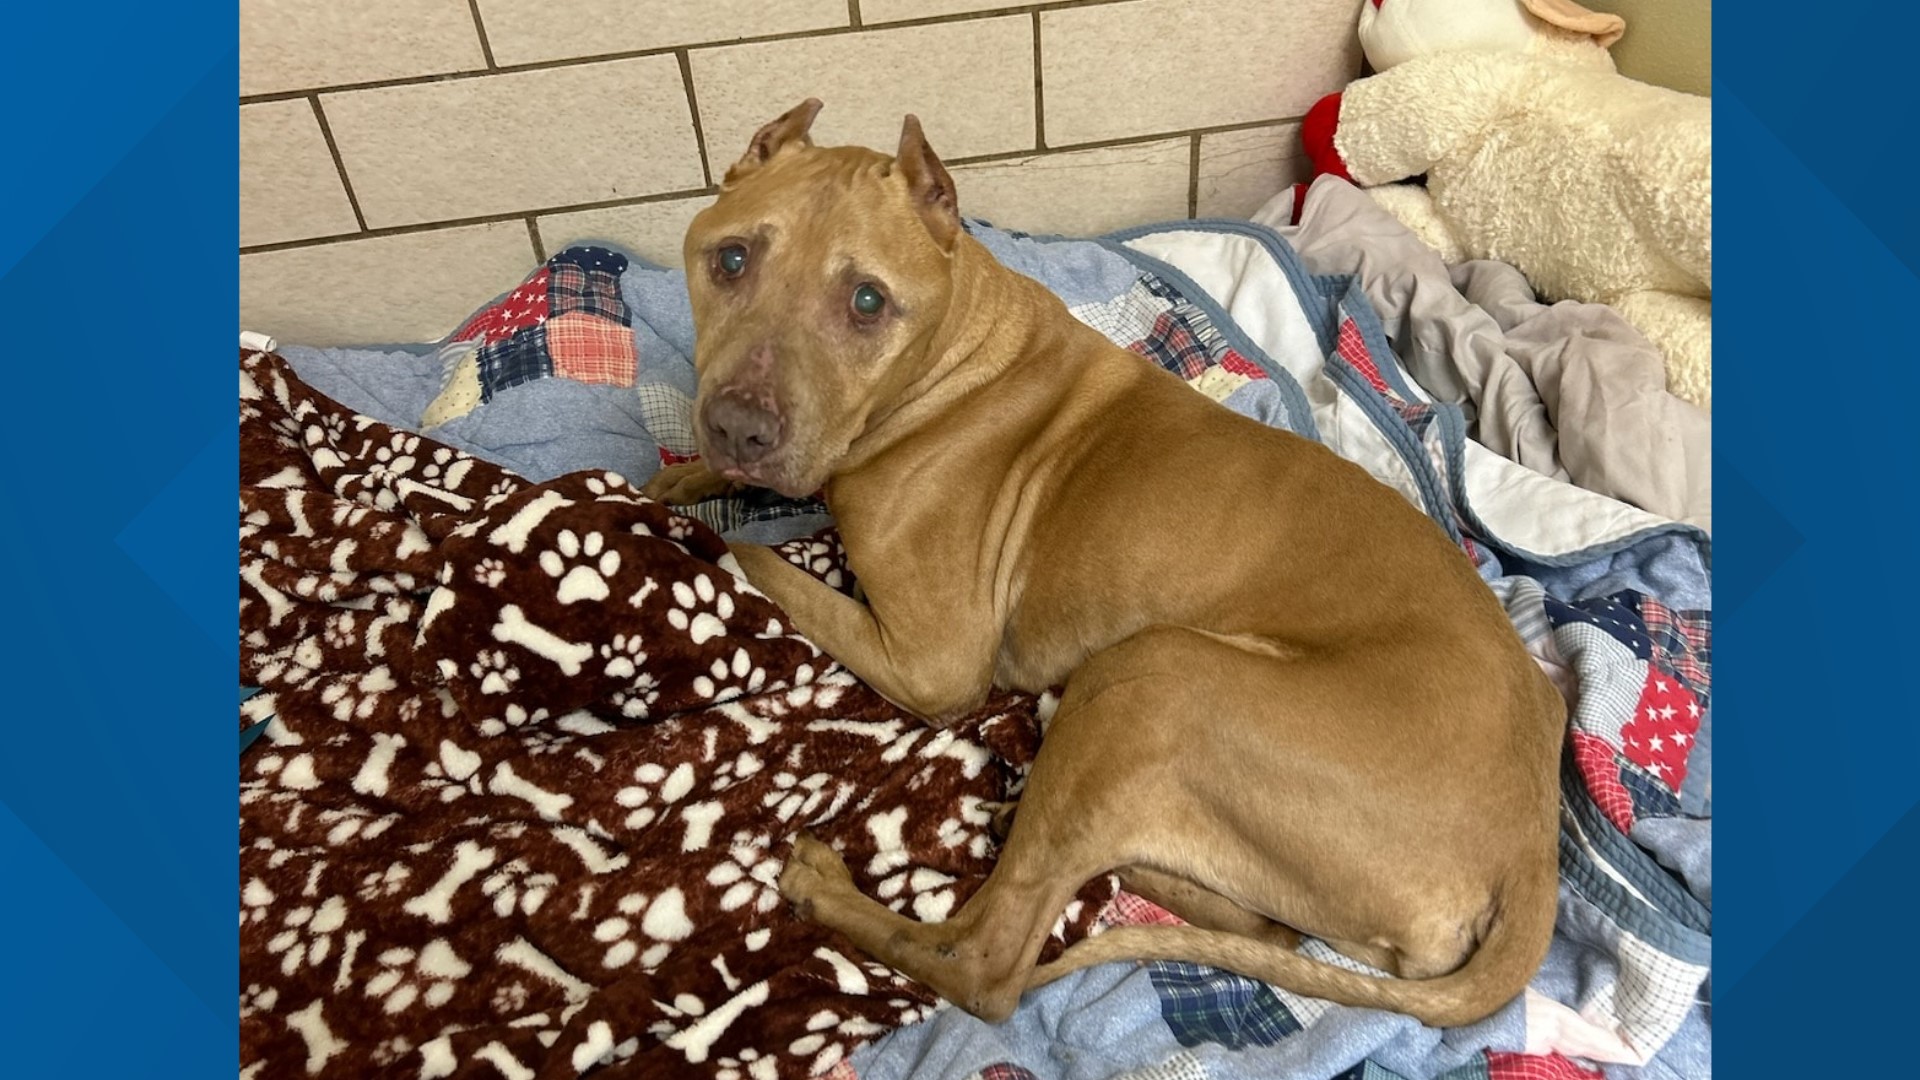 Despite making remarkable progress, Buddy still has medical needs, including upcoming medical appointments which will be completely covered by the HSLC.